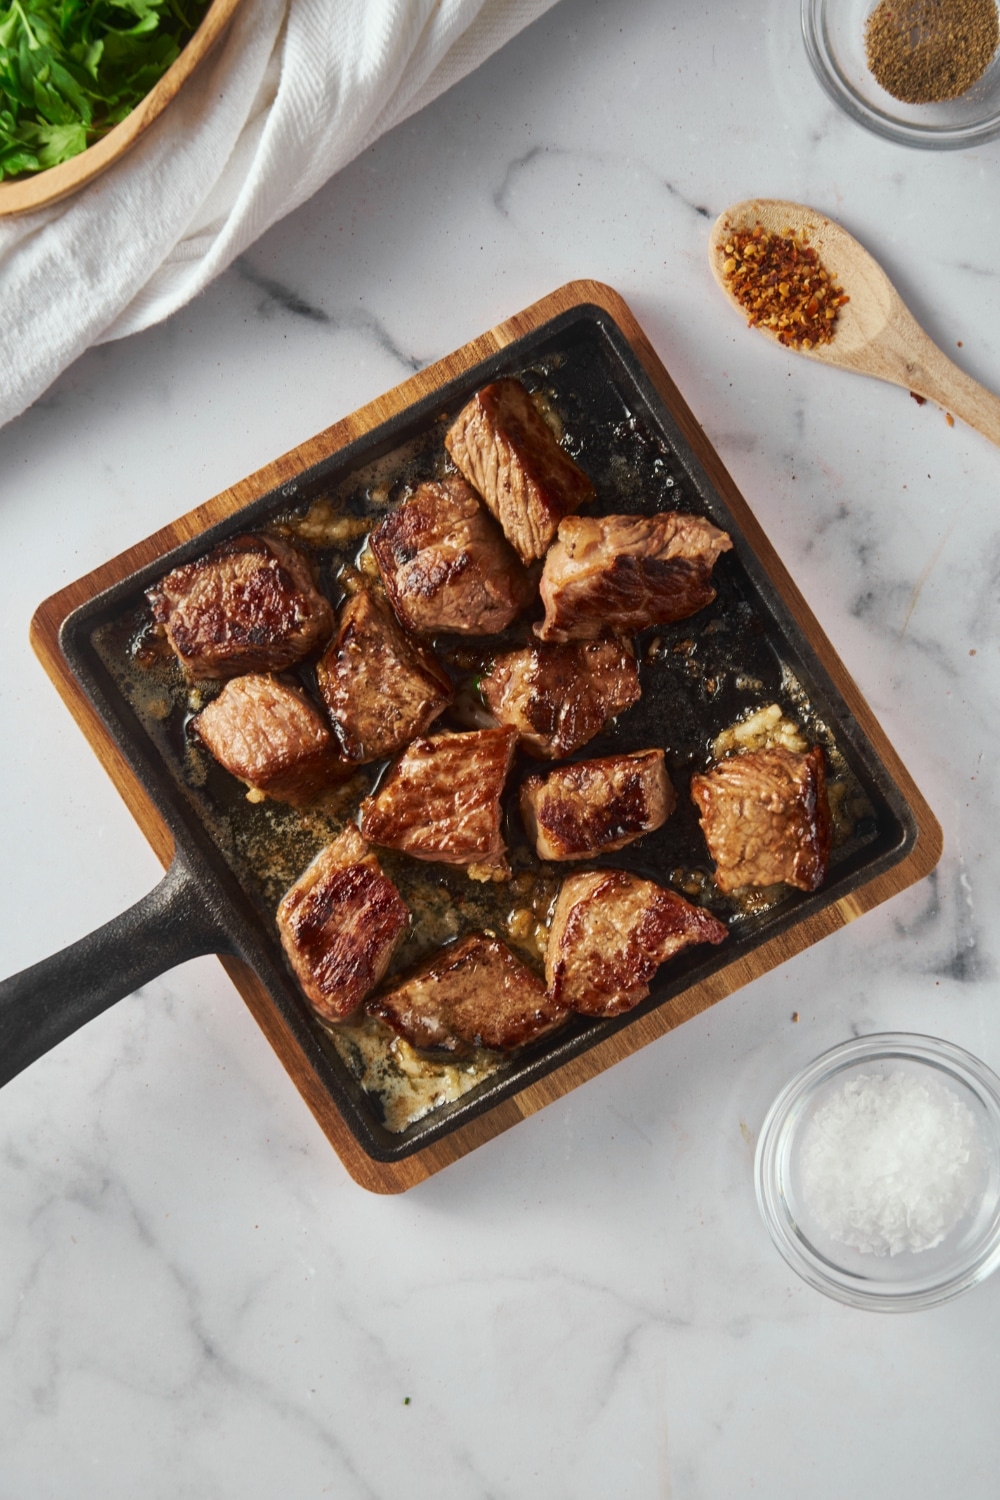 Seared steak bites with garlic and butter on a square cast iron pan.